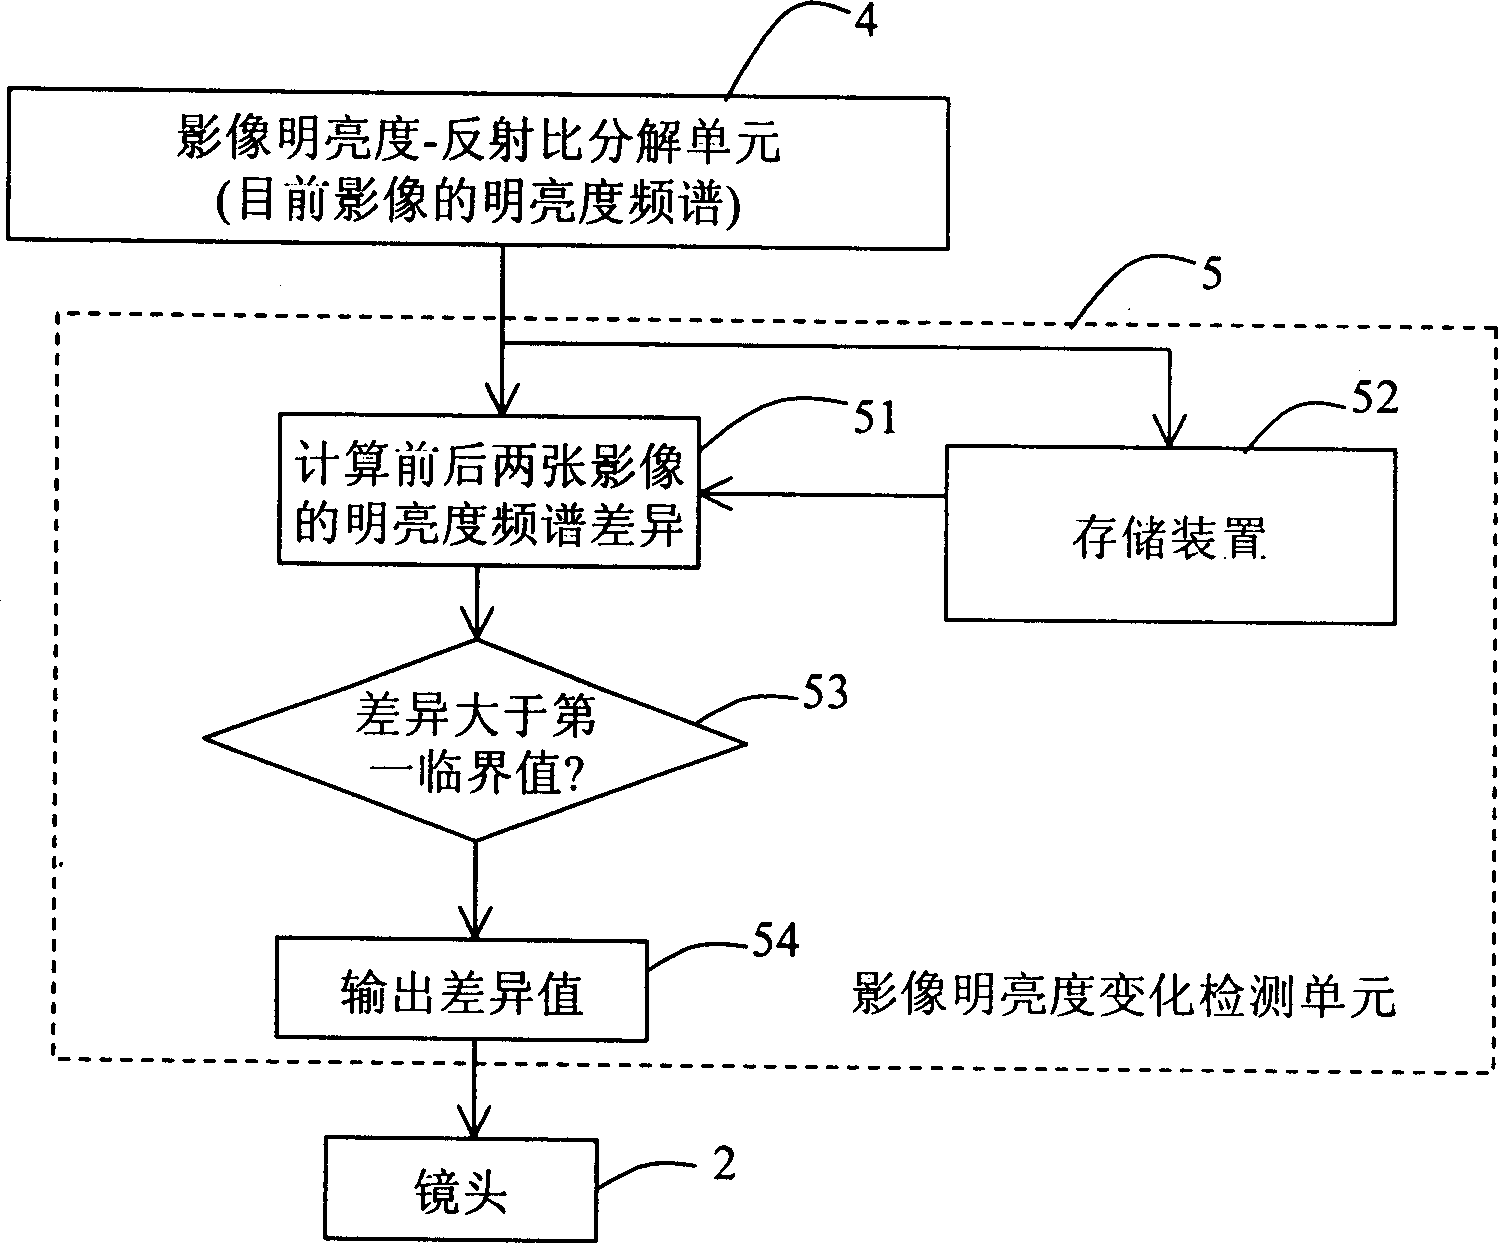 Digital image monitoring control system capable of automatic adjusting lens diaphragm and detecting object movement